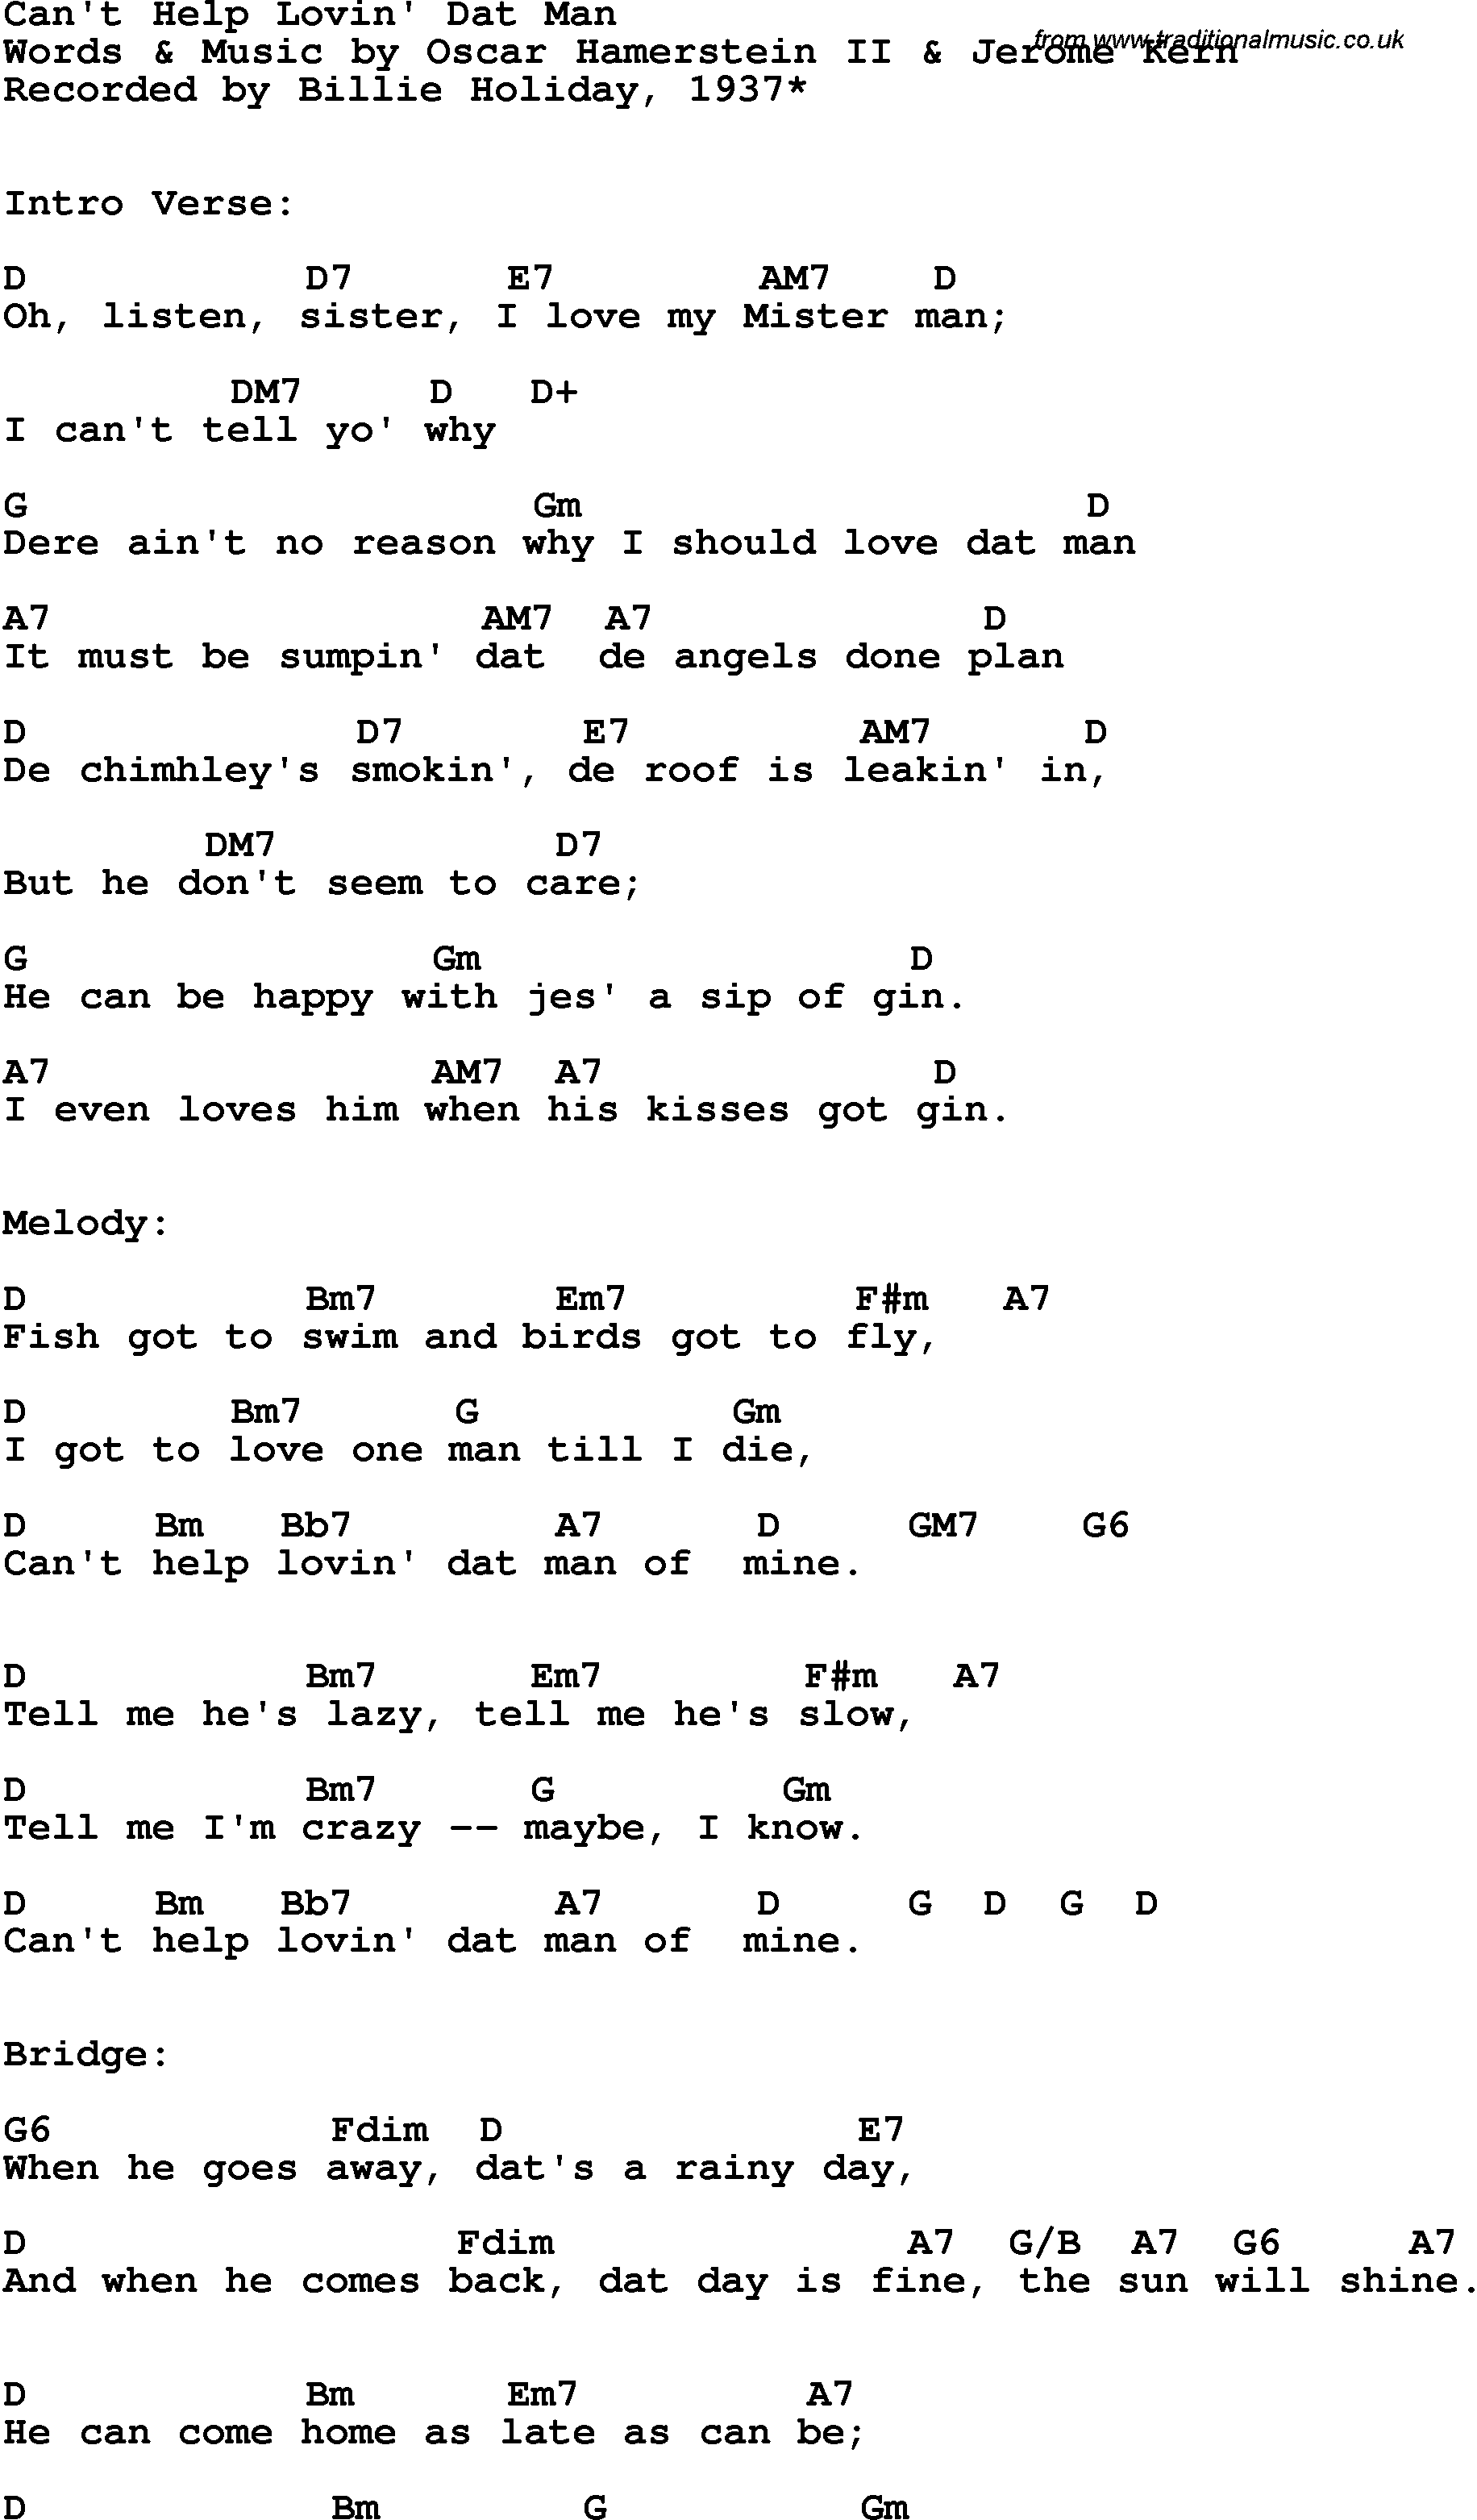 Song Lyrics with guitar chords for Can't Help Lovin' That Man - billie Holiday, 1937